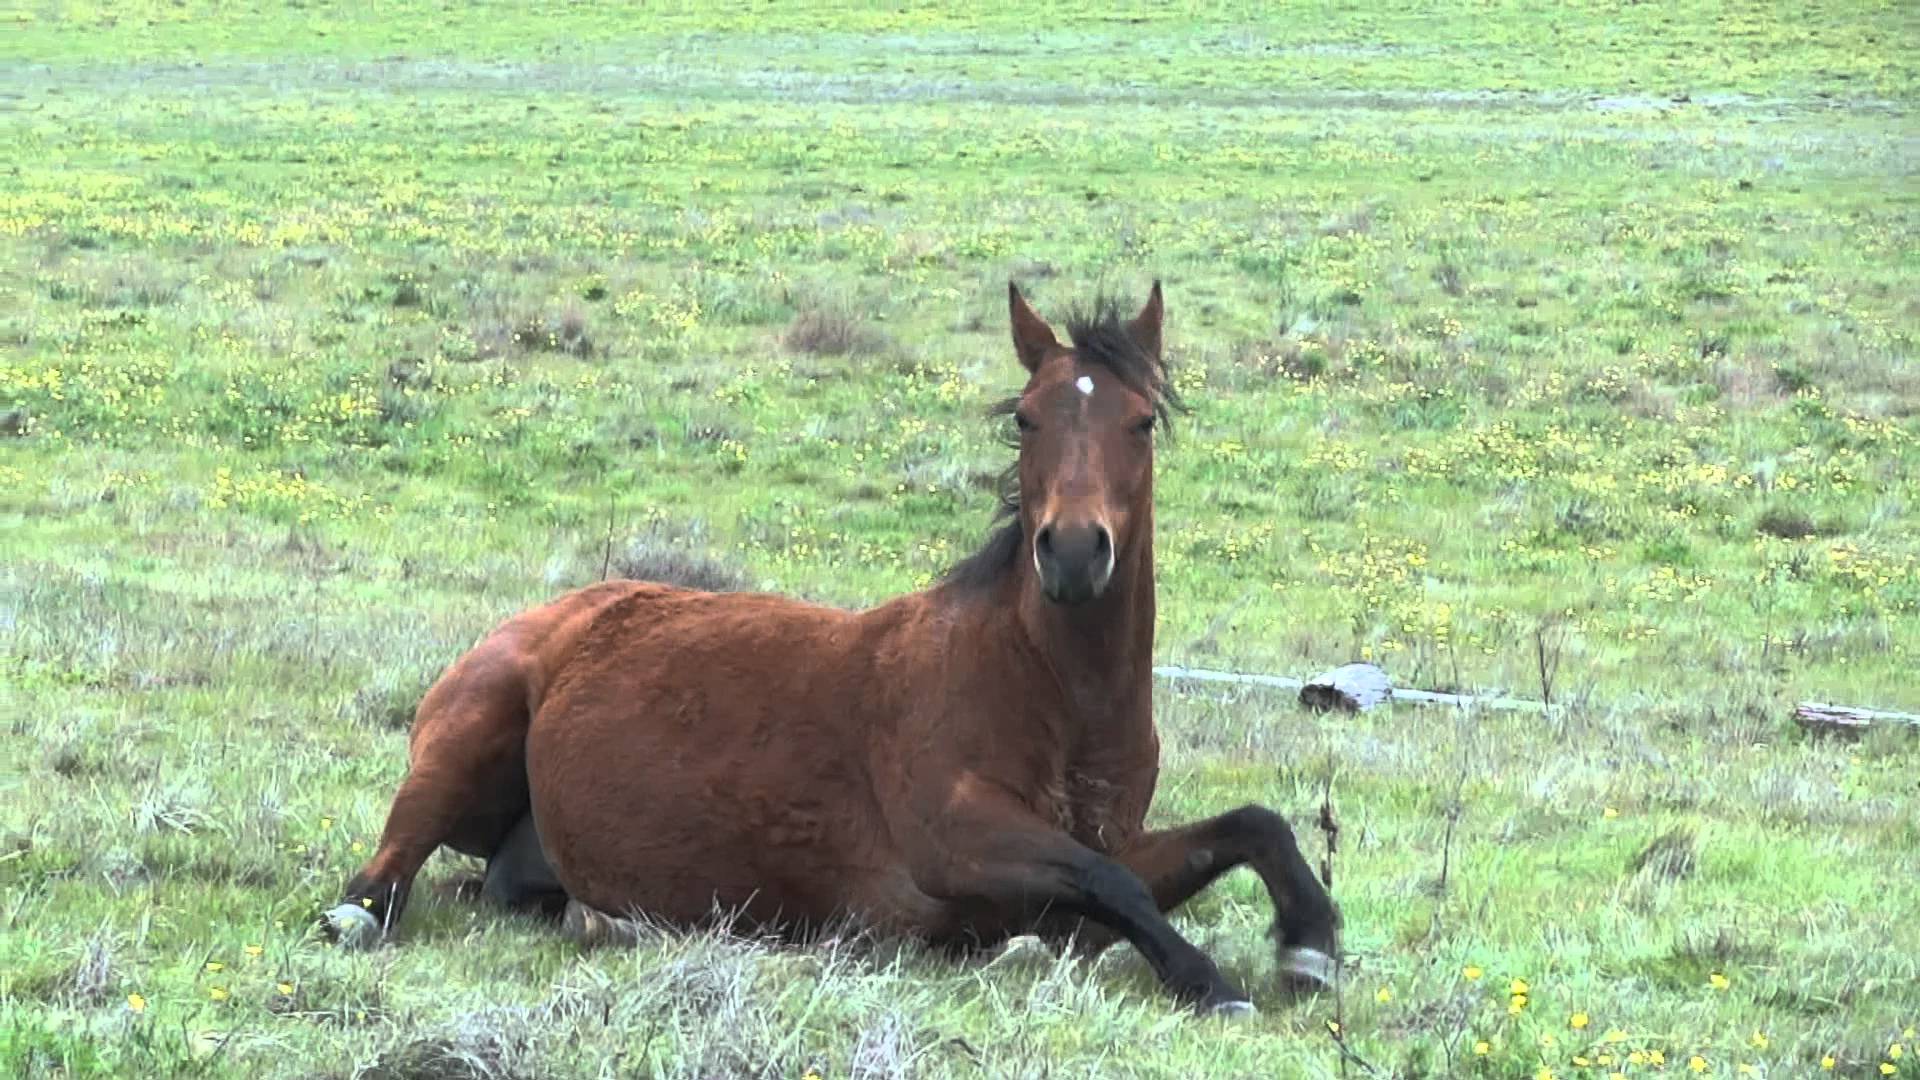 Very pregnant horse - YouTube